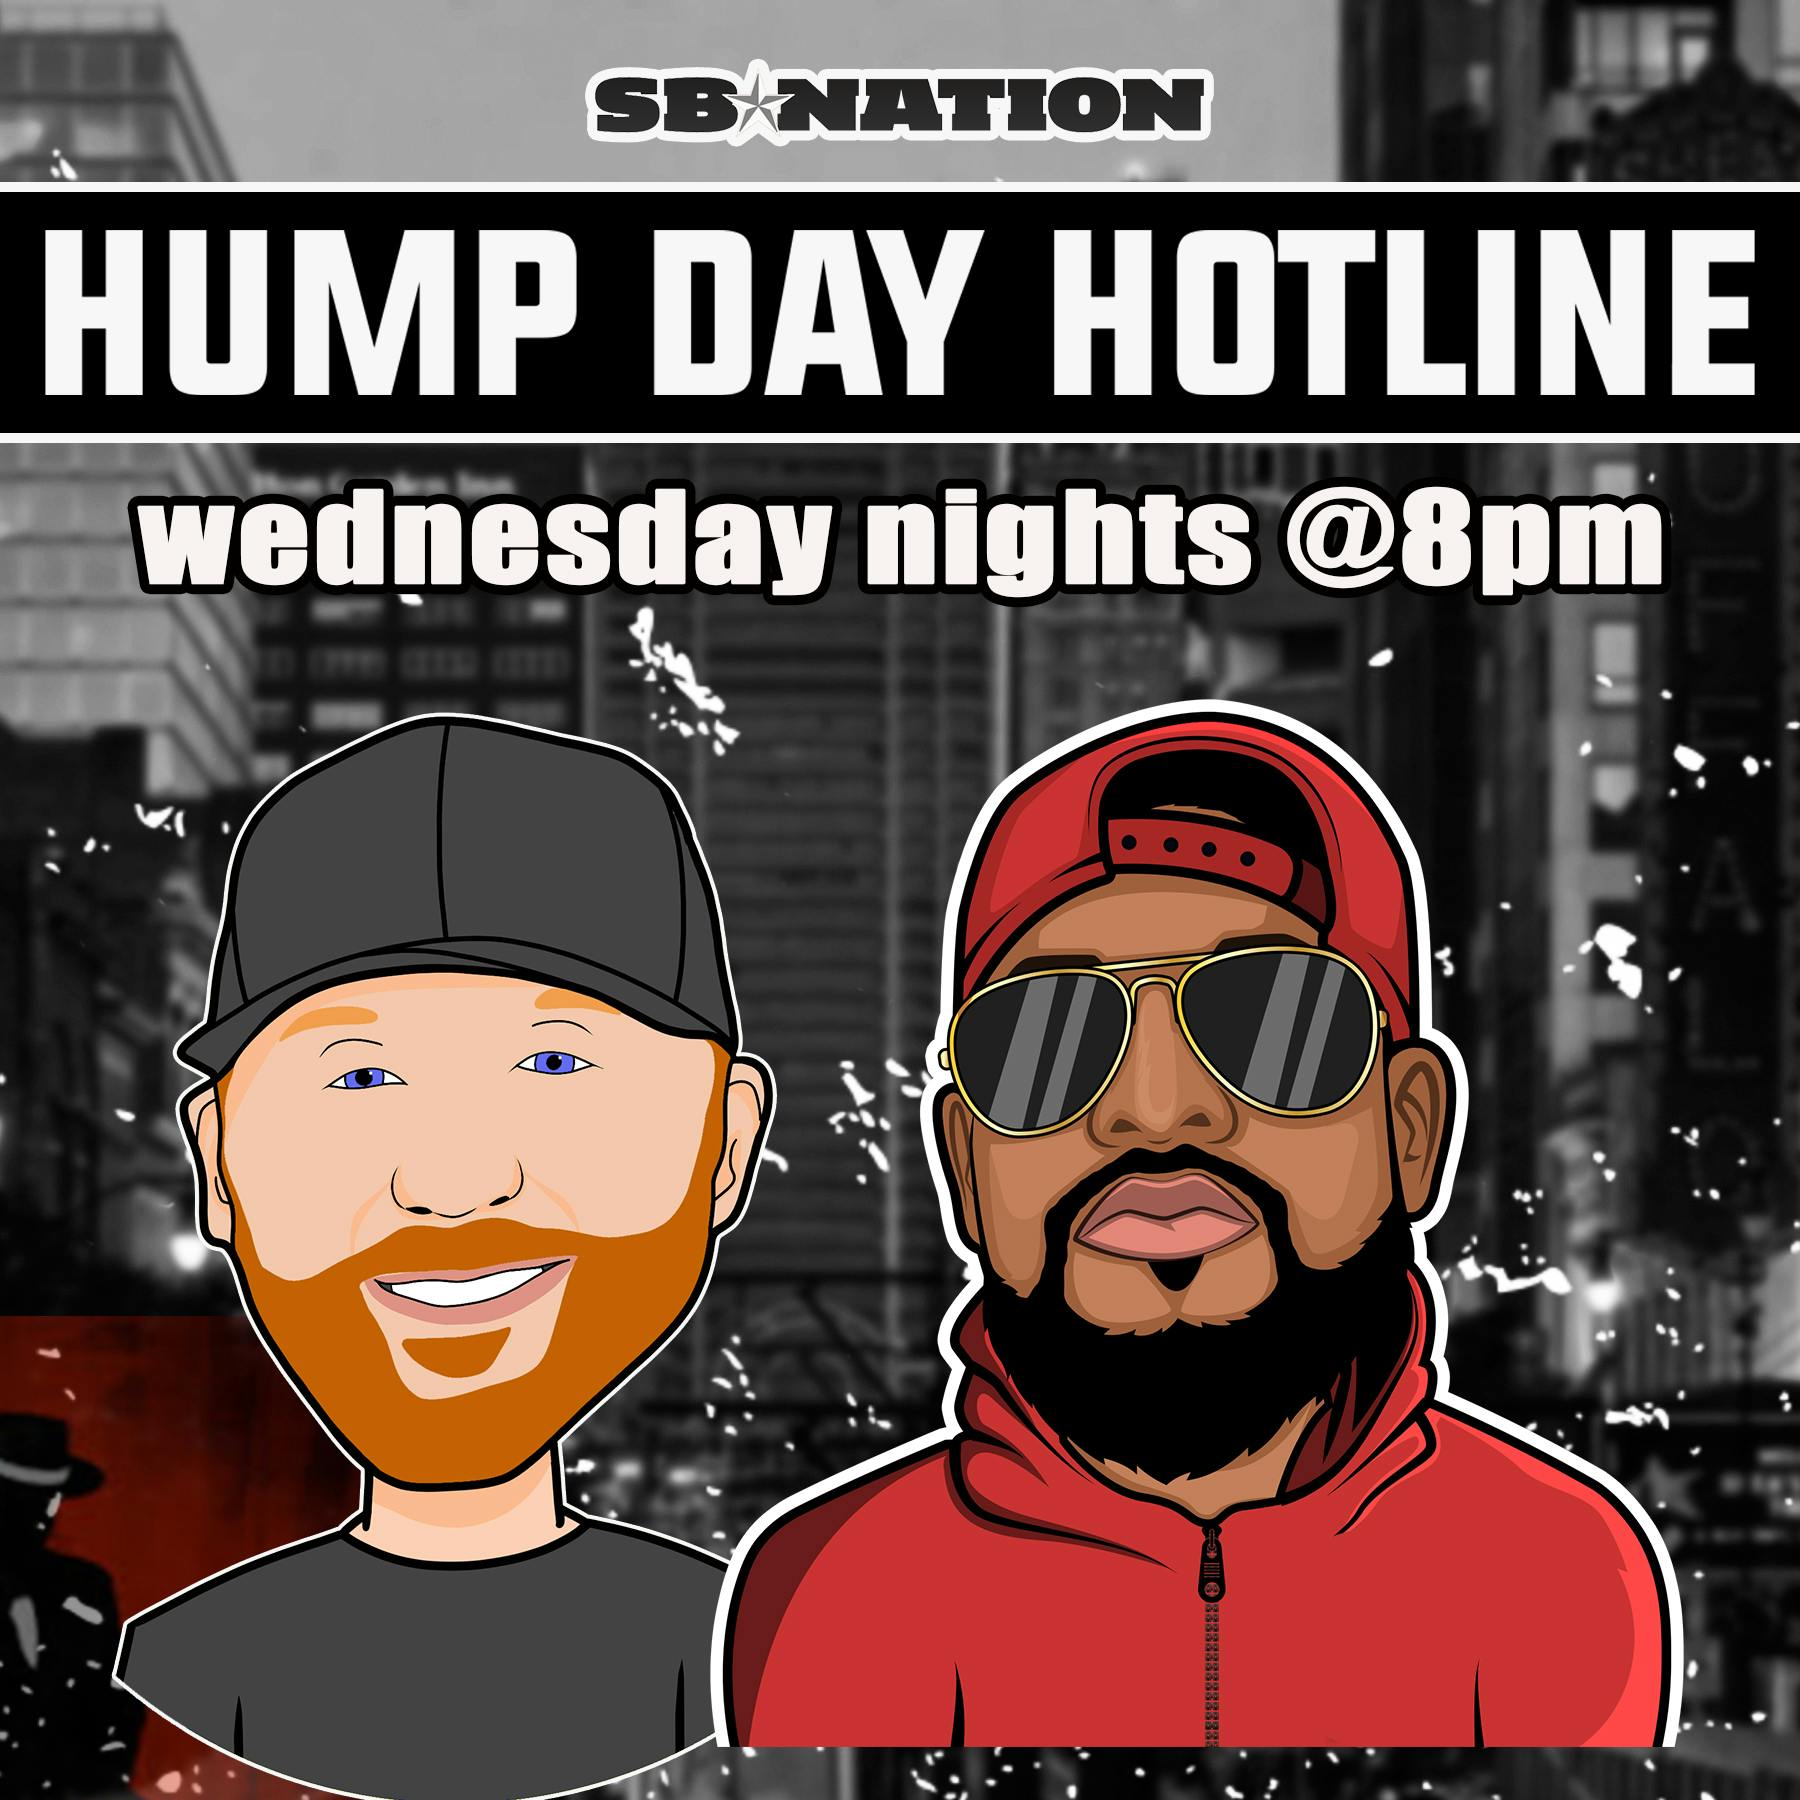 Hump Day Hotline | Mid Week Report